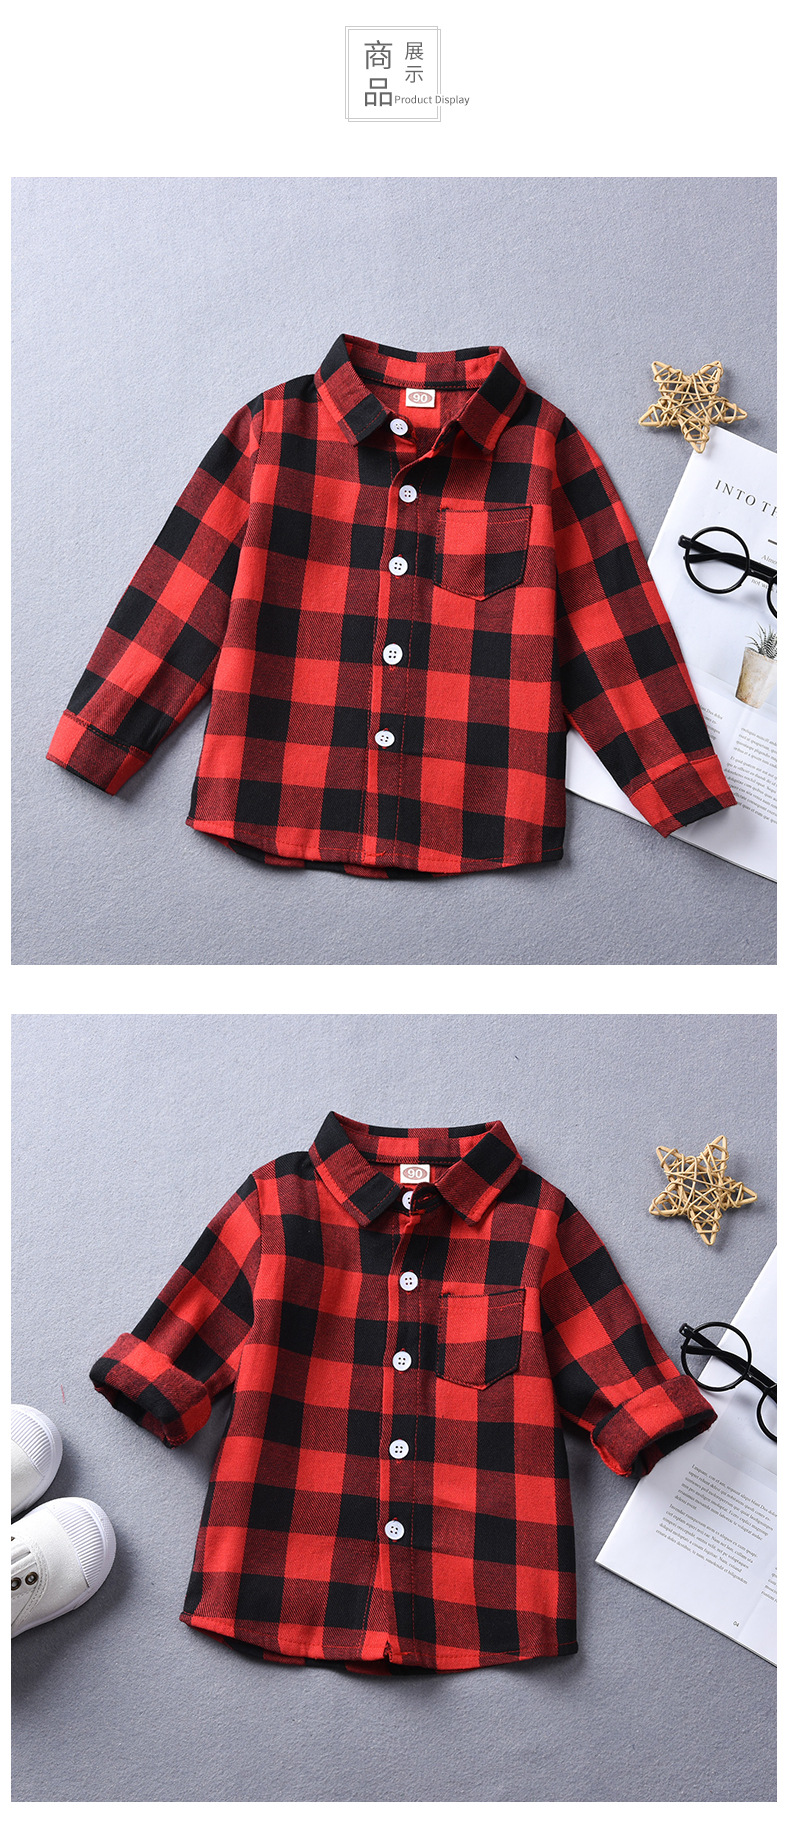 2021 Autumn New Boys' Plaid Shirt Casual Top Letter Printed Children's Handsome Shirt Boys' Clothing display picture 2